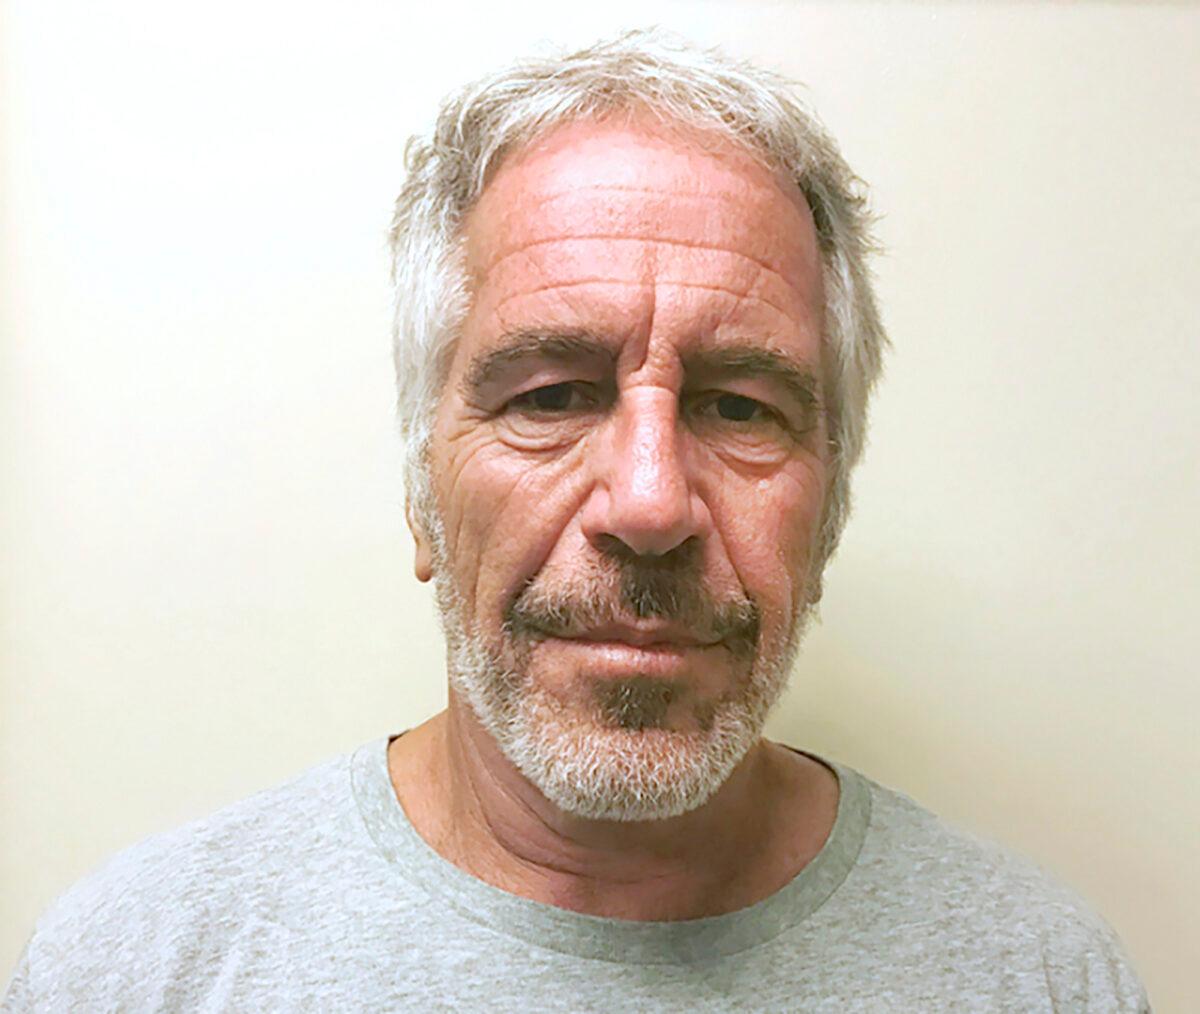 Jeffrey Epstein in a March 28, 2017, file photo. (New York State Sex Offender Registry via AP)